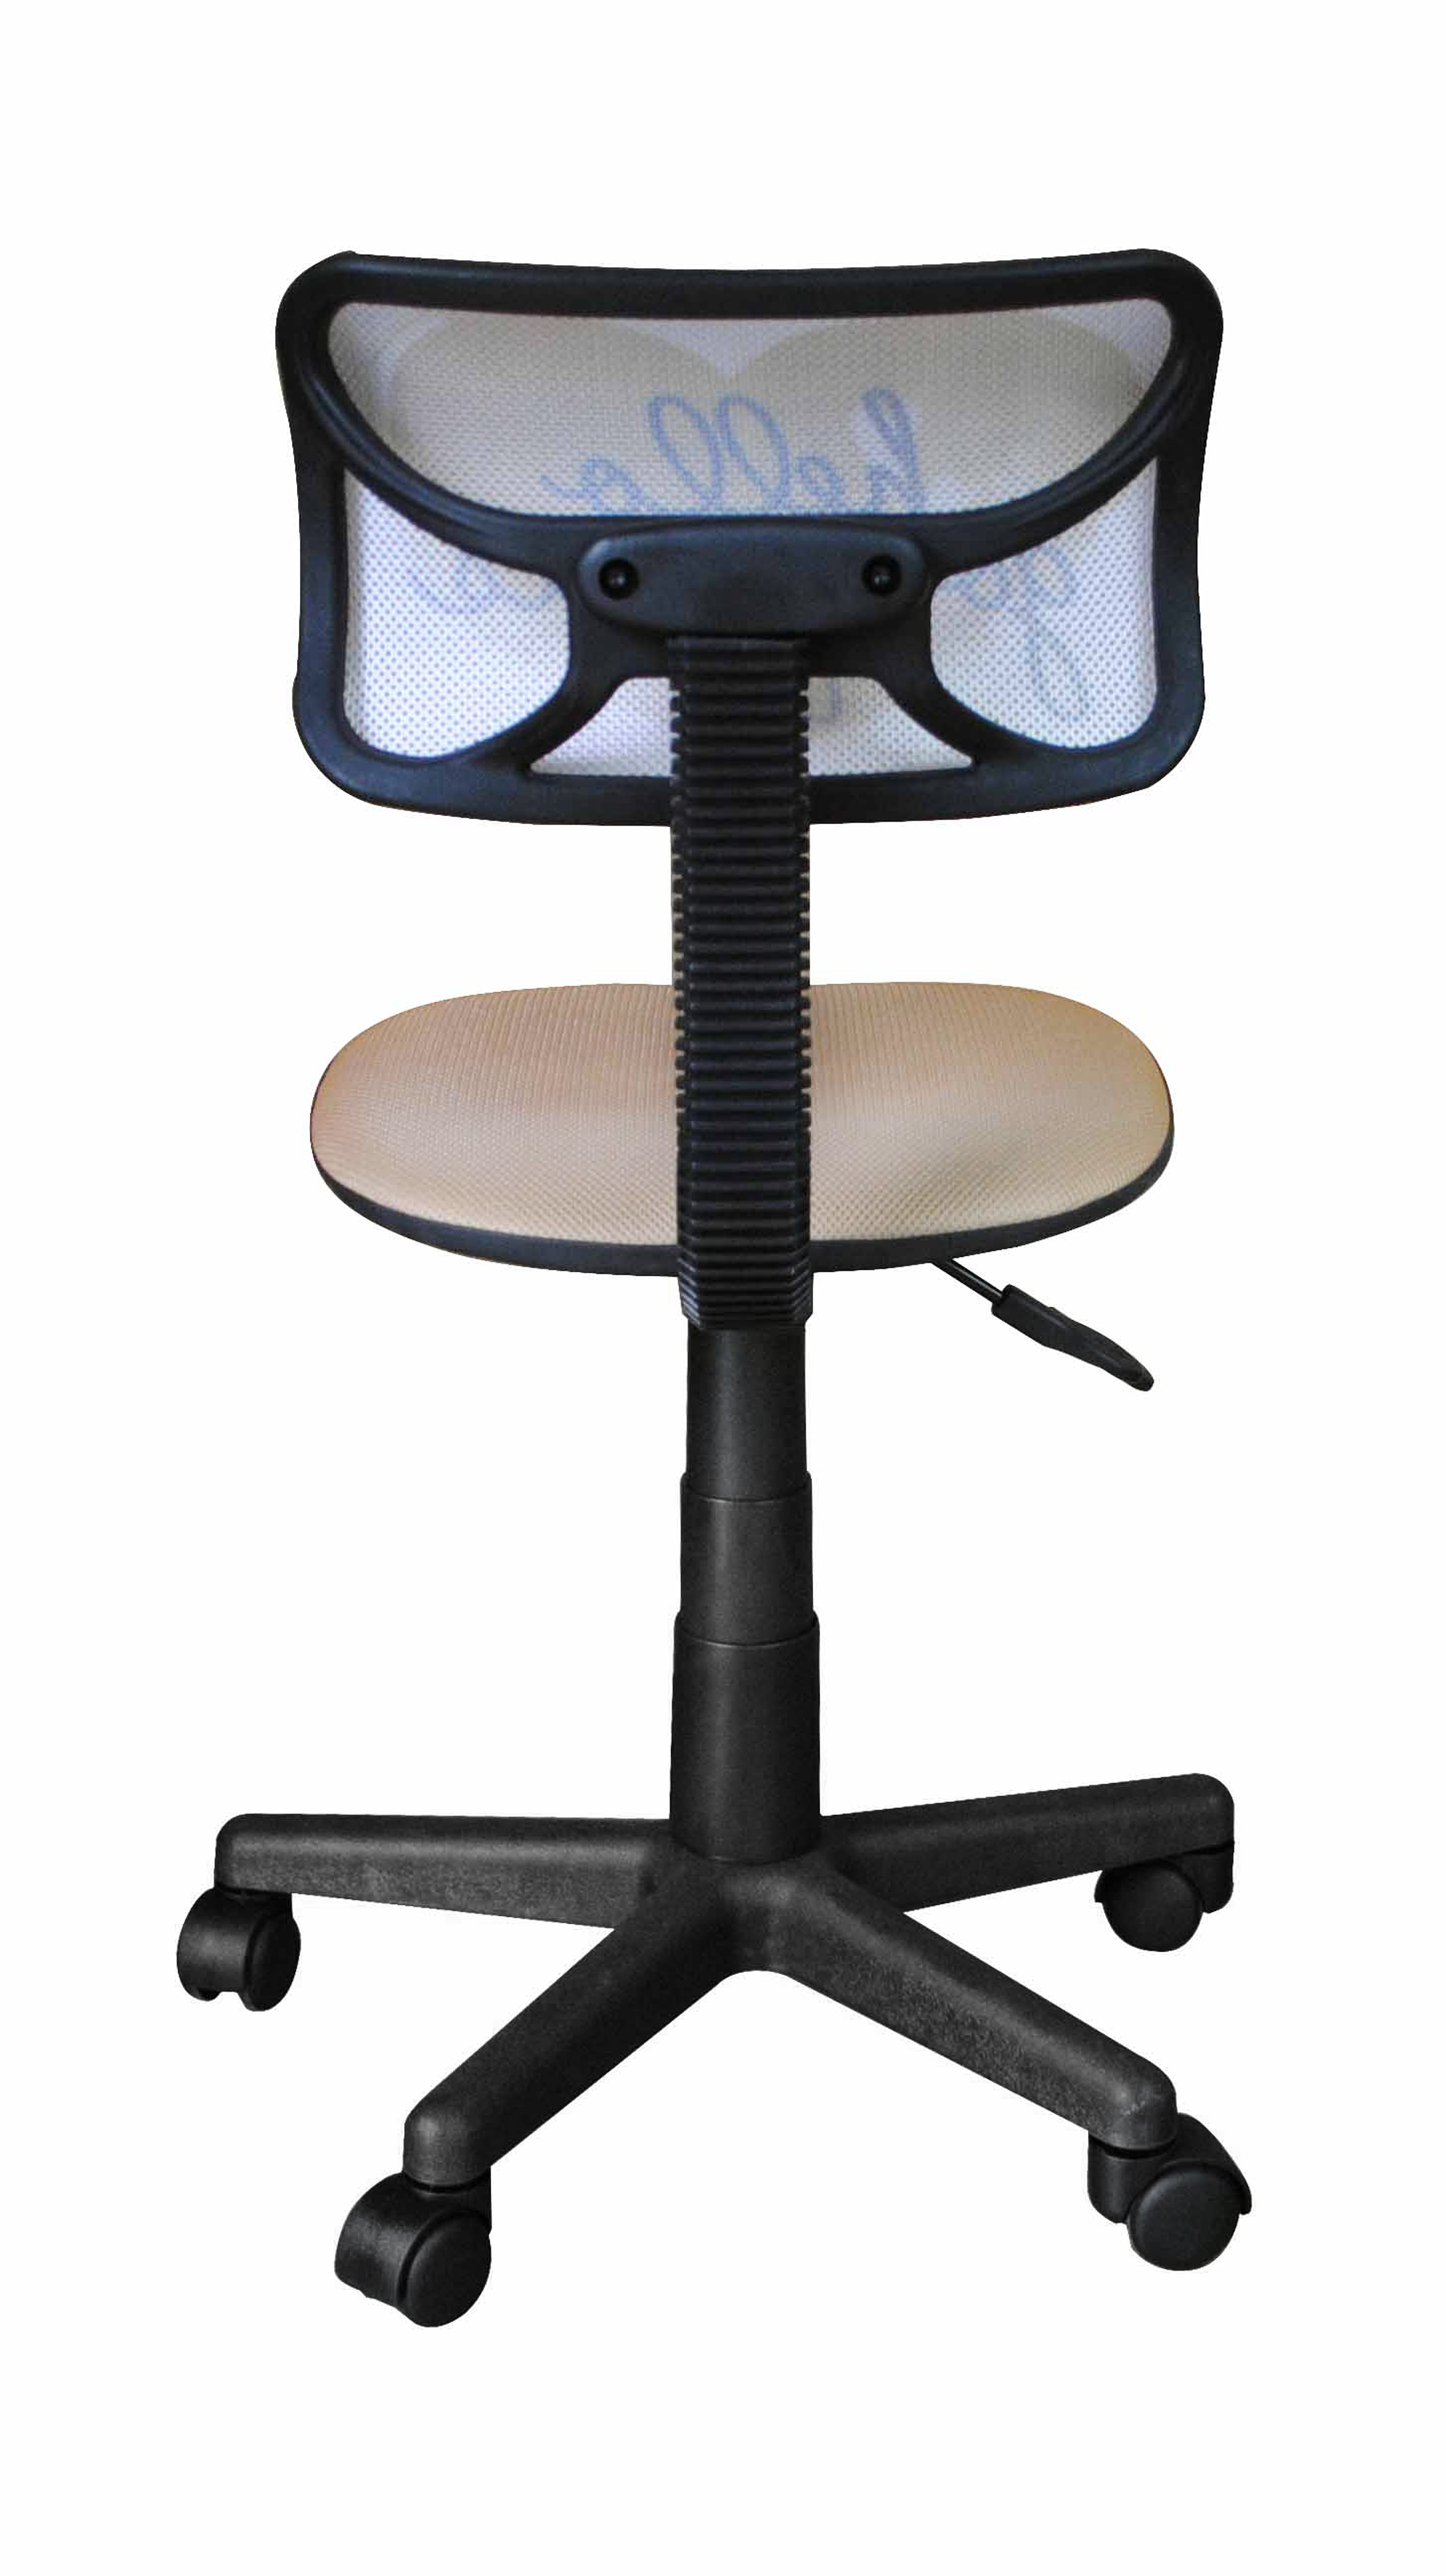 Urban Shop Task Chair with Adjustable Height & Swivel, 225 lb. Capacity, Multiple Colors - image 3 of 5